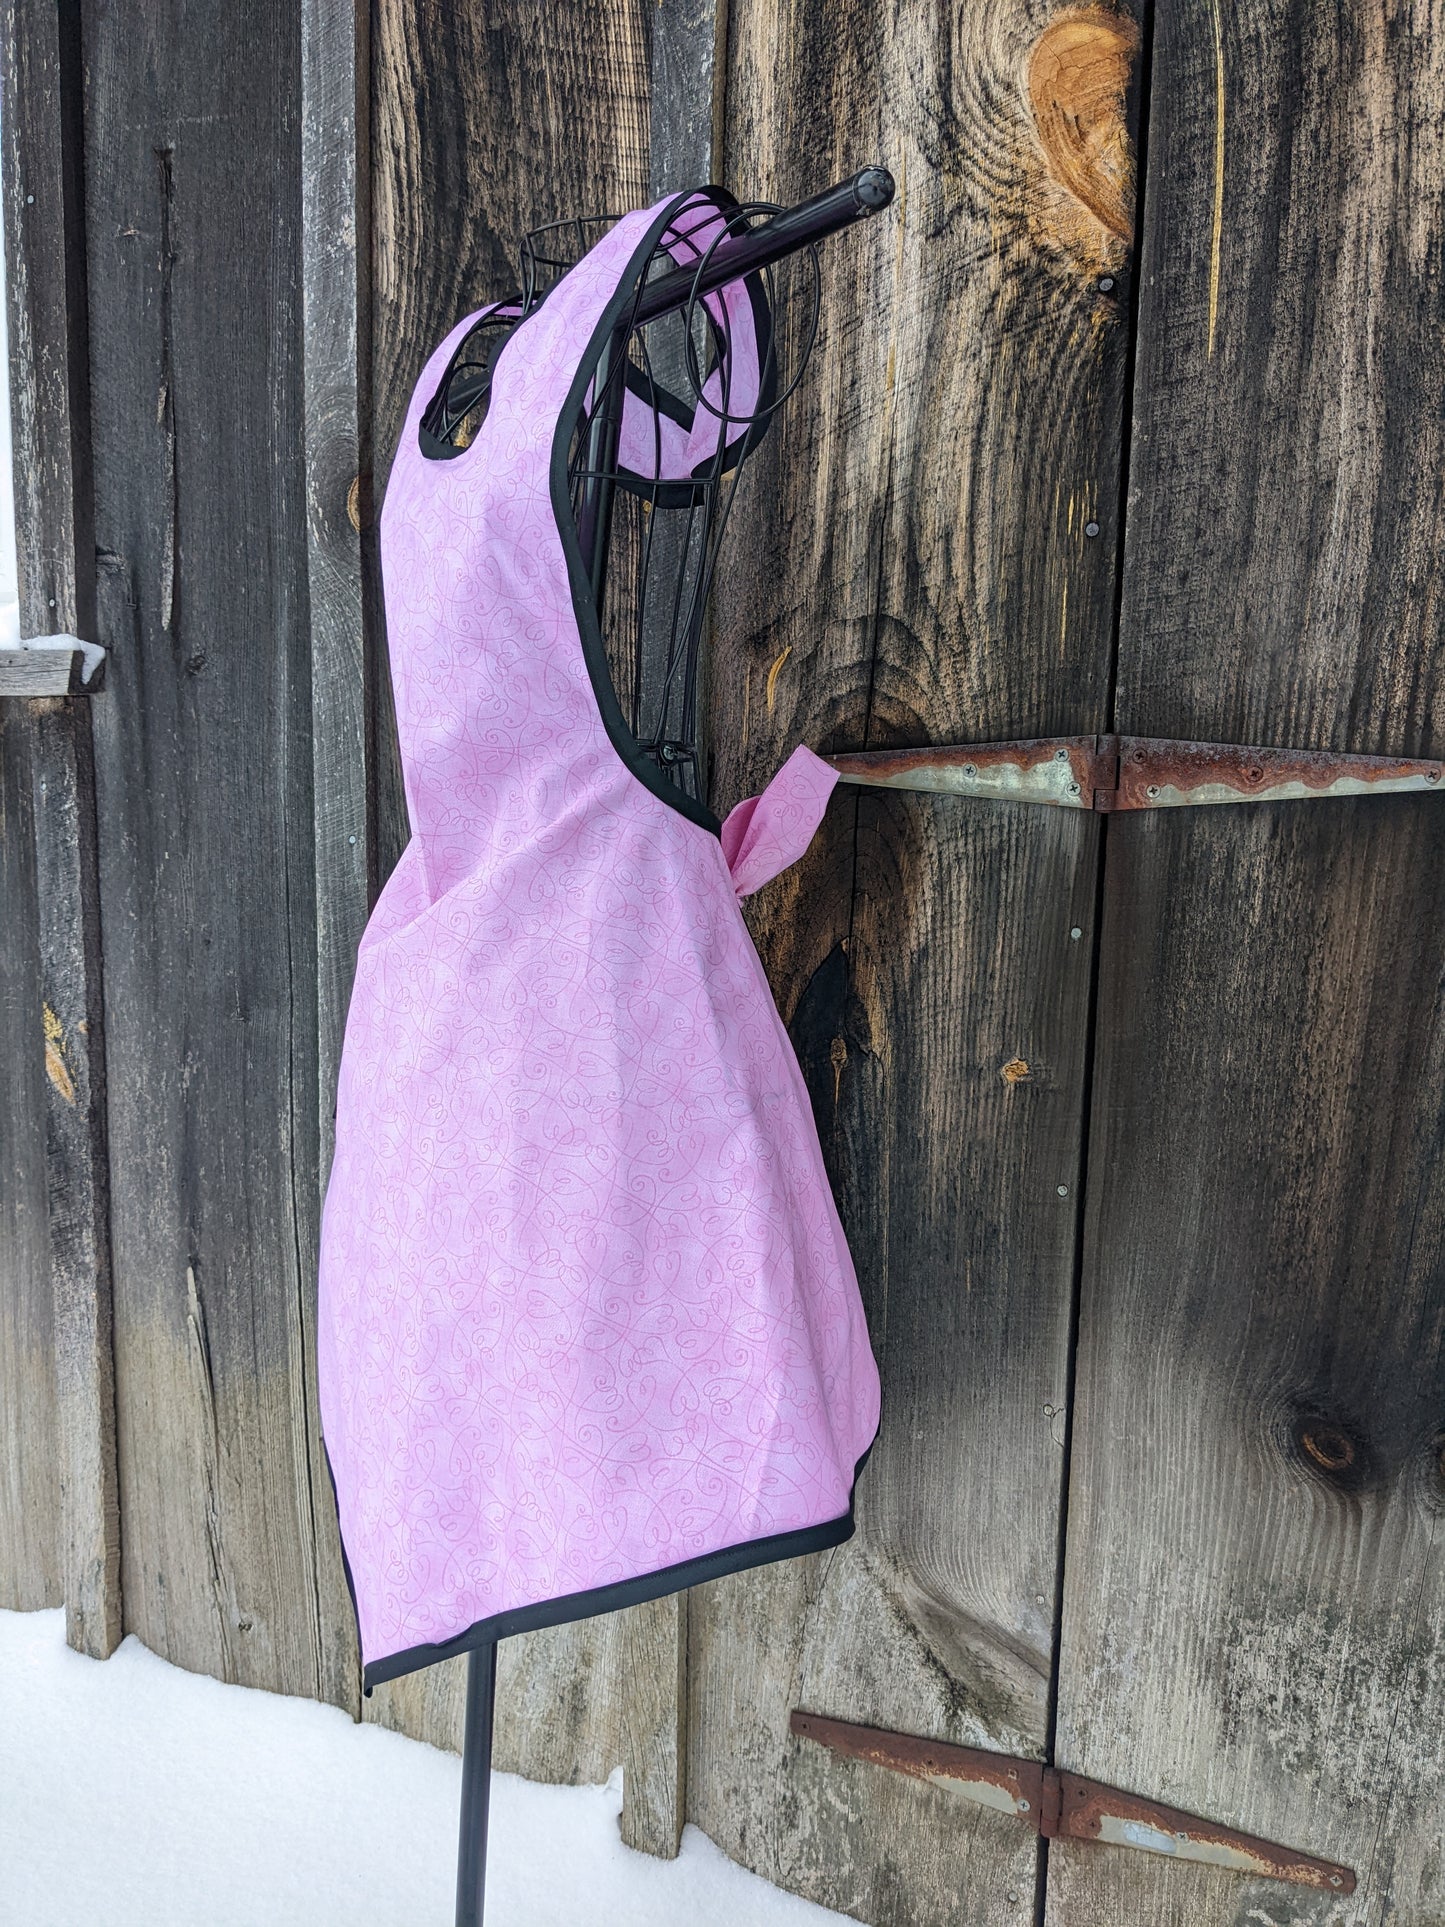 Sweetheart Vintage Inspired Apron in Pink and Black